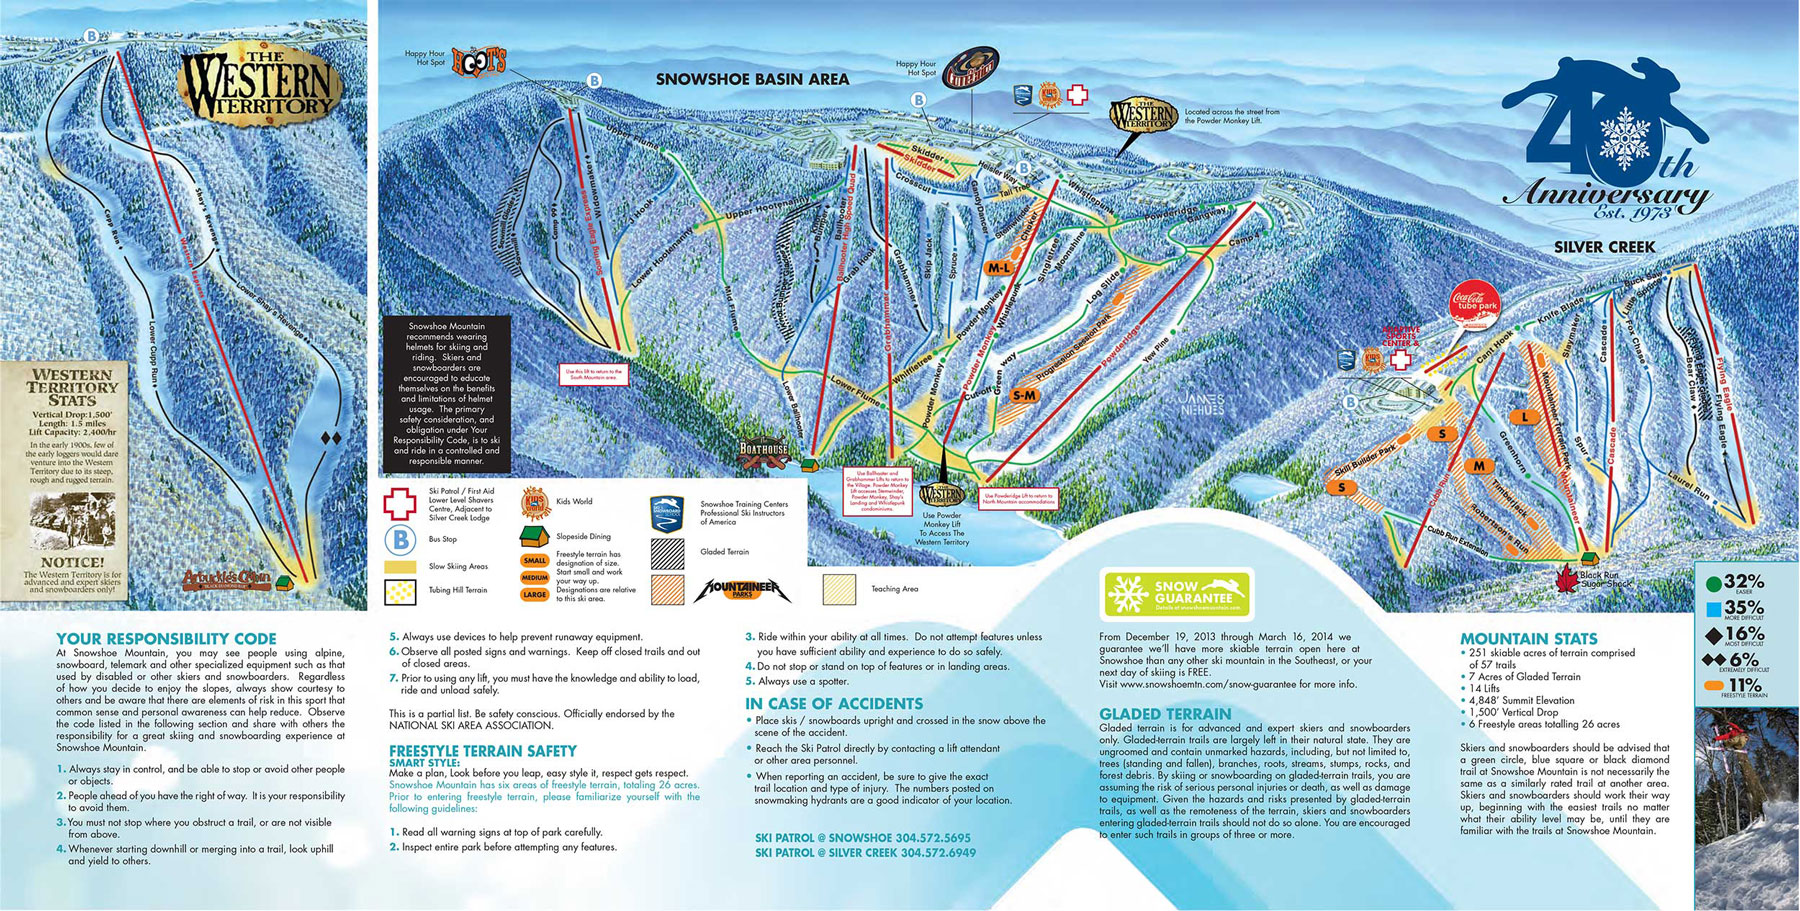 Webcams 2024 Events Calendar Directions Trail Map Lift Tickets Snowshoe Hours